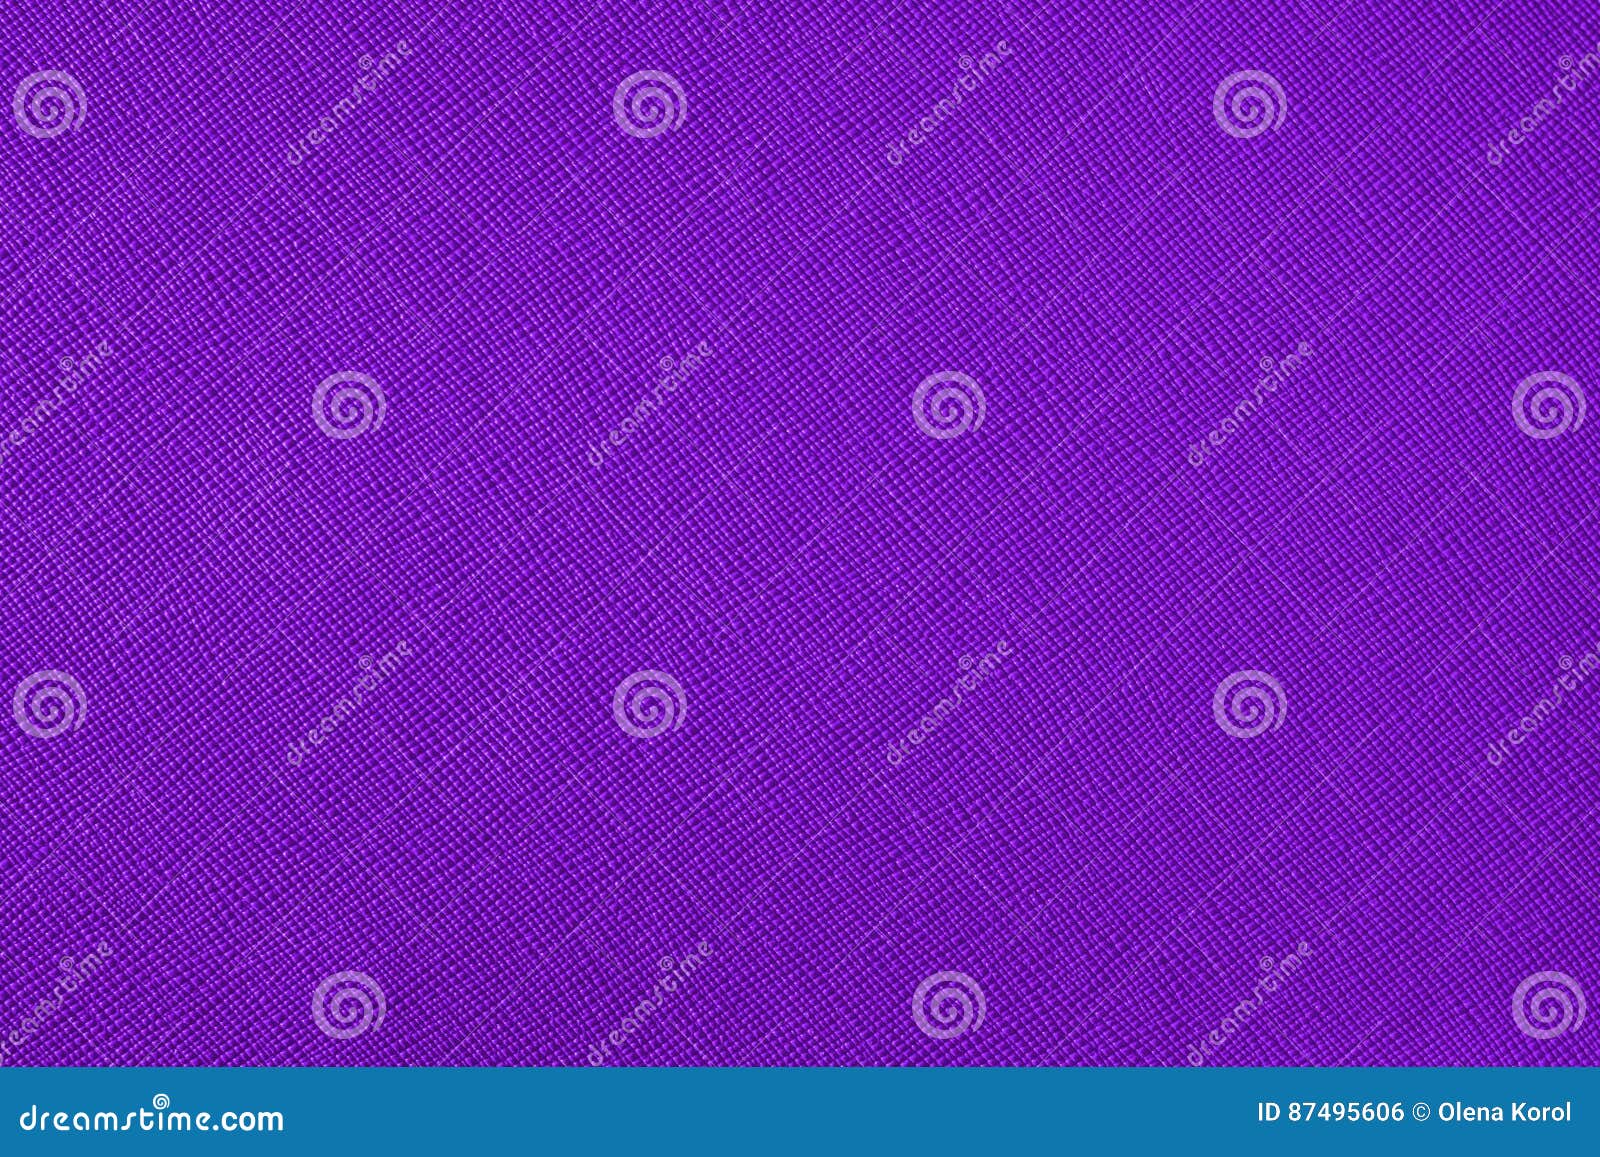 texture with a pattern of a plurality of lines. colored purple background